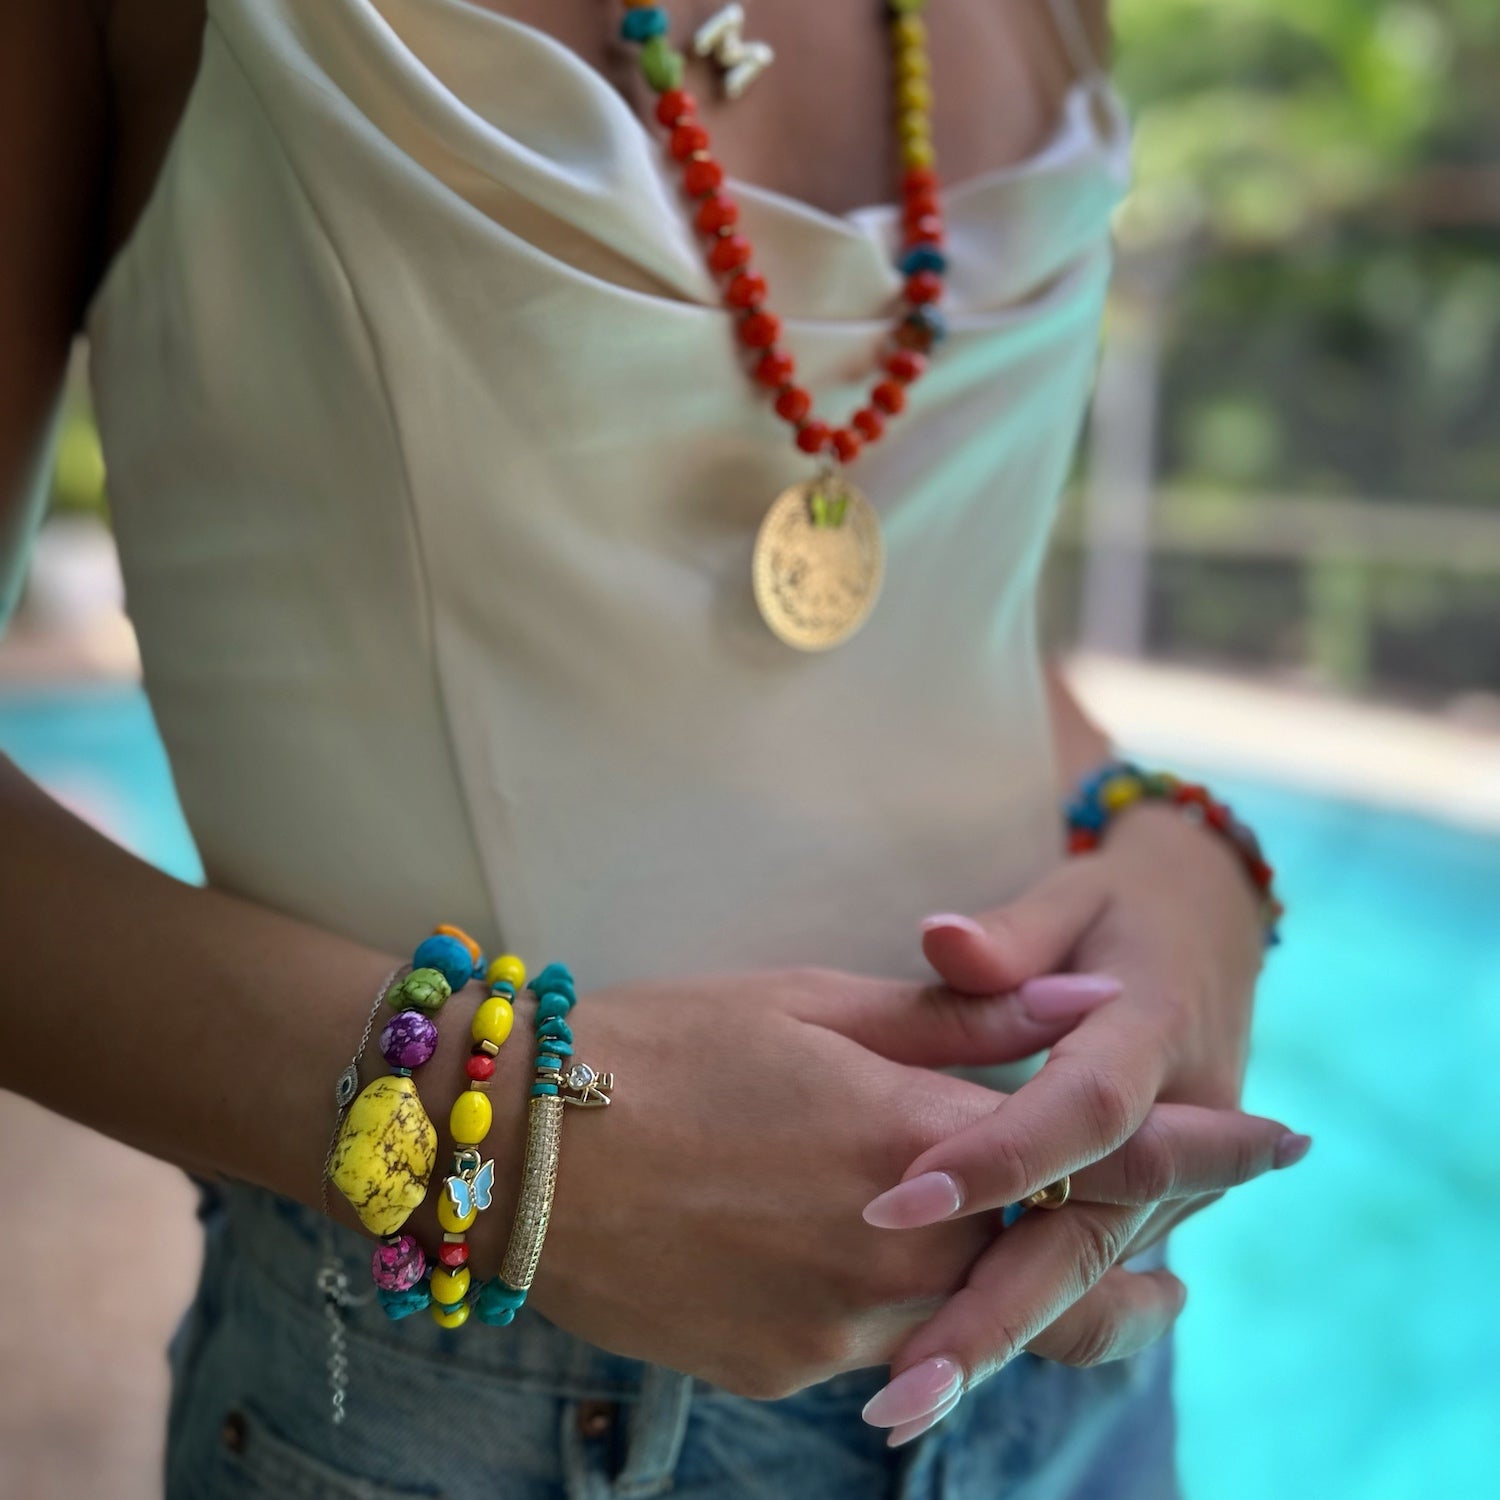 See how the Rainbow Butterfly Bracelet beautifully adorns the hand model&#39;s wrist, exuding a sense of whimsy and elegance.